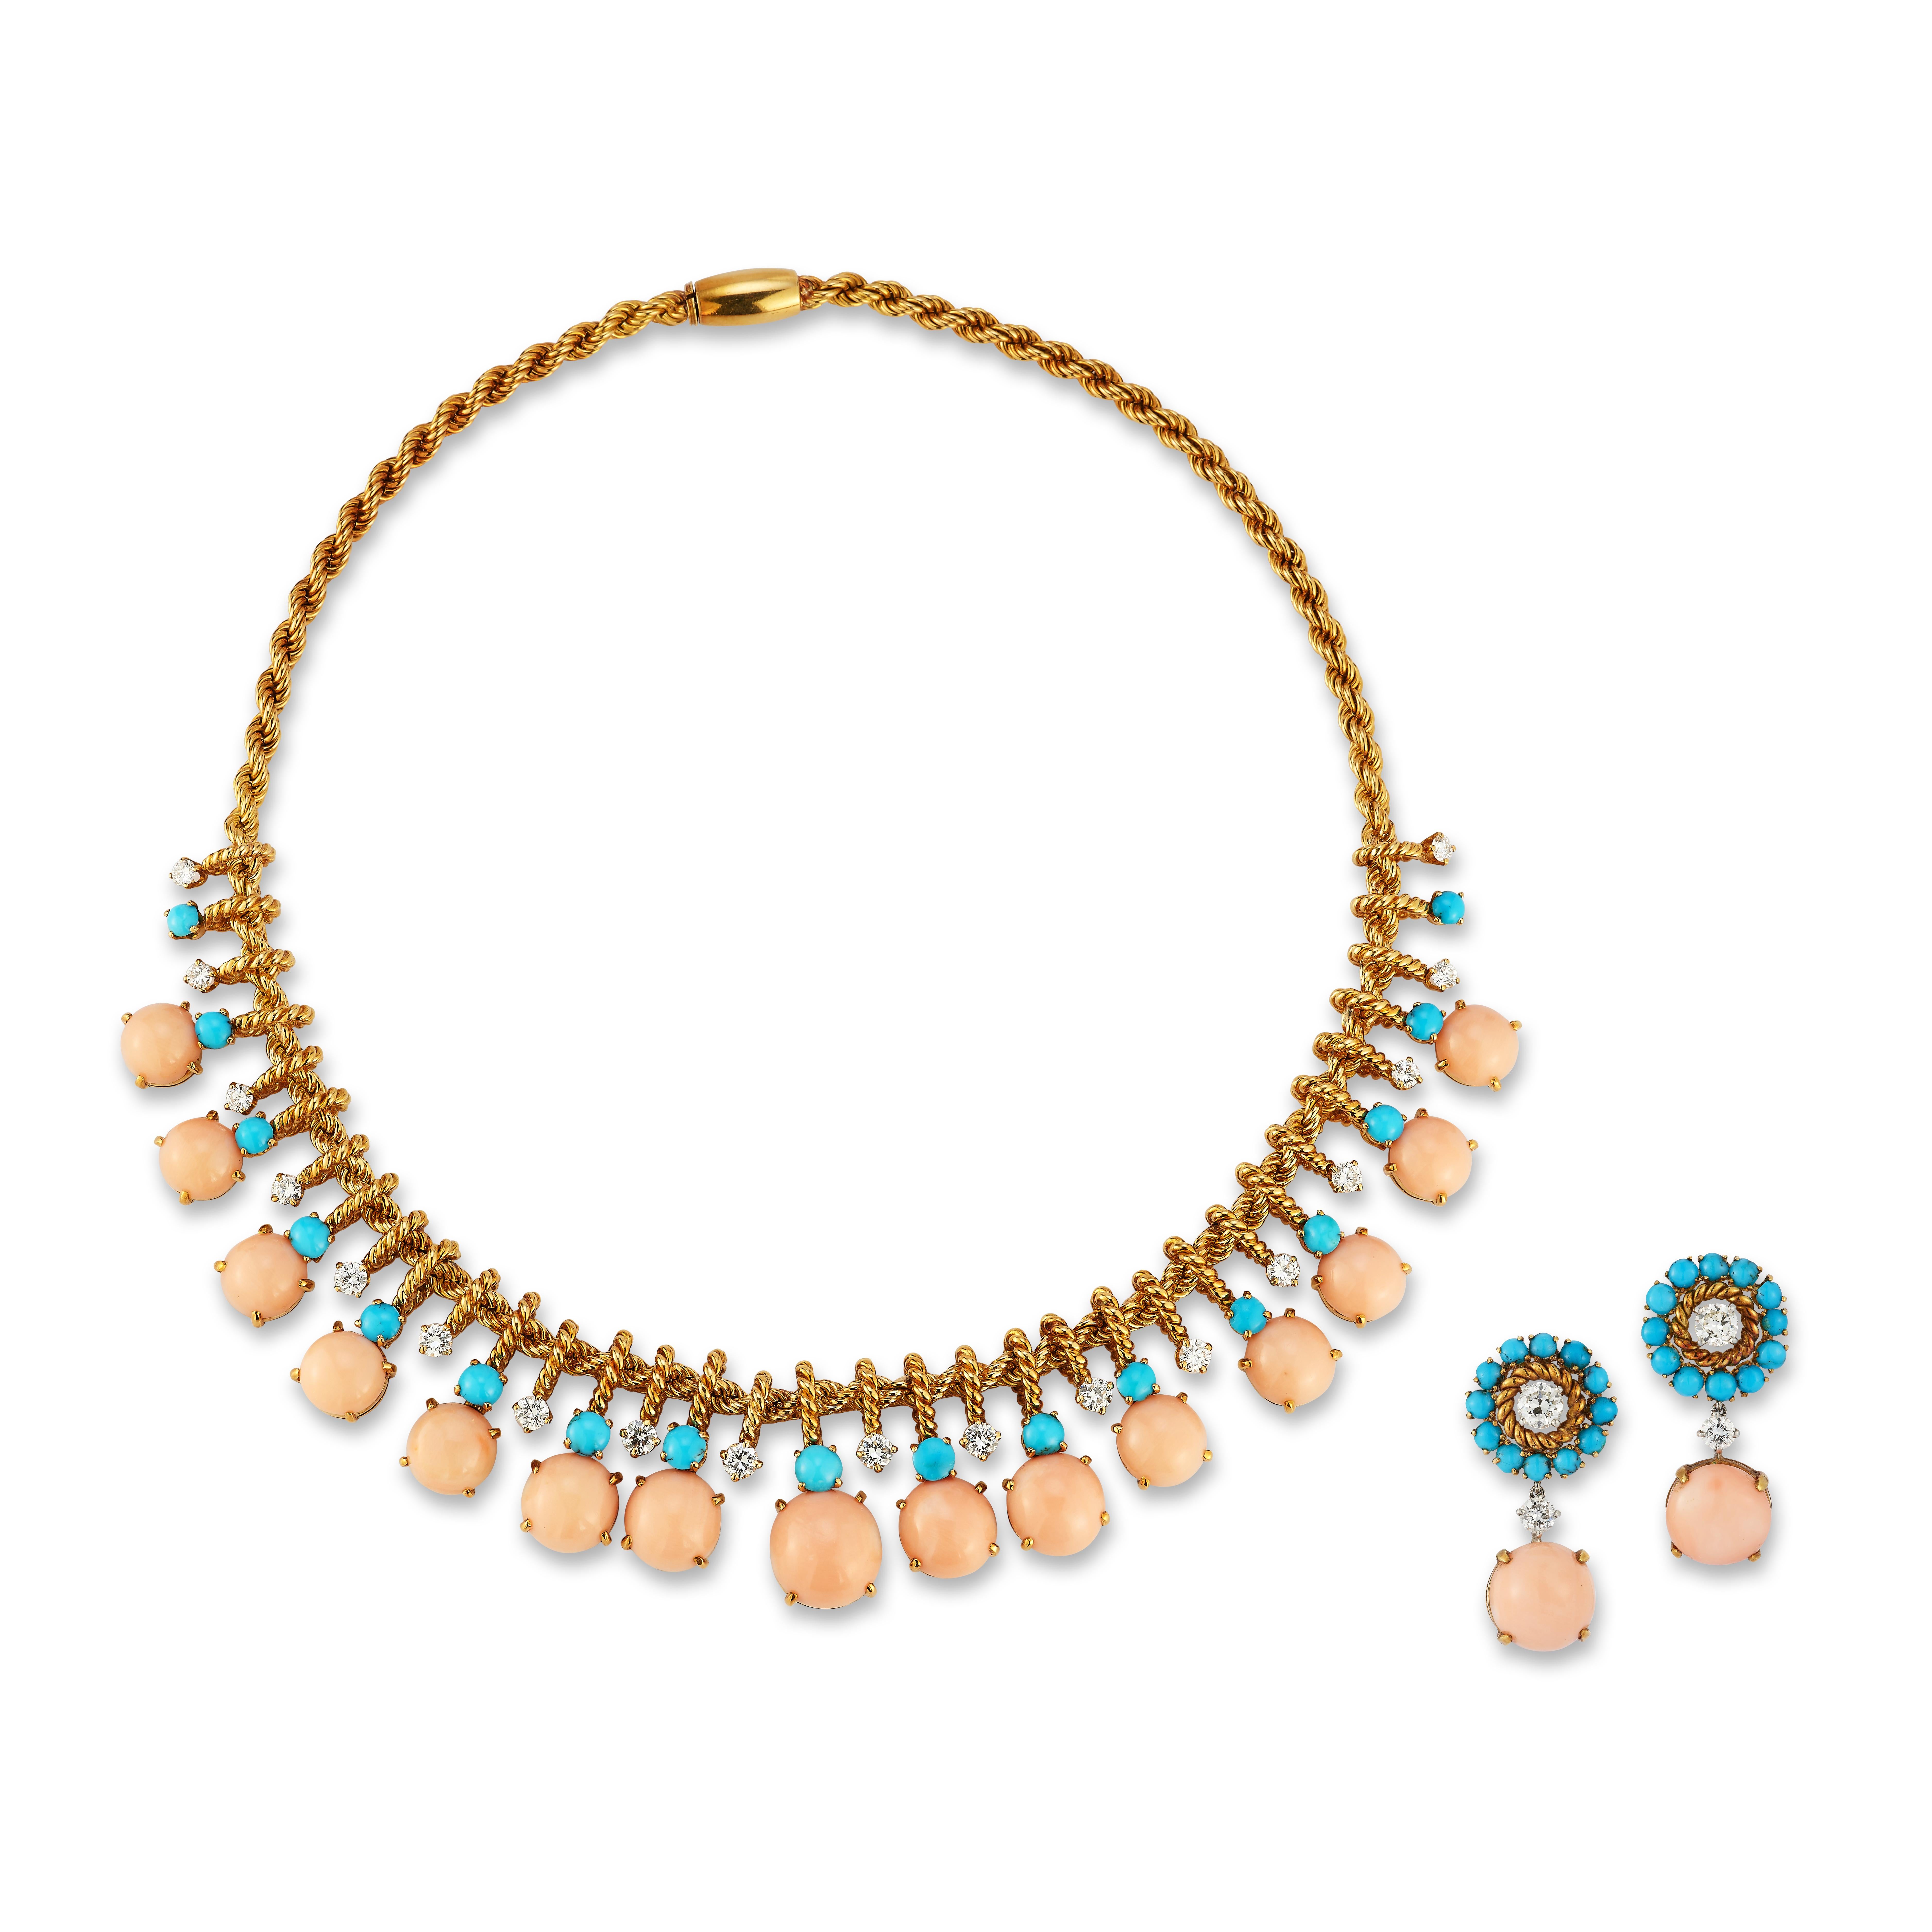 Iconic Van Cleef & Arpels Coral & Turquoise Necklace & Earrings Set For Sale